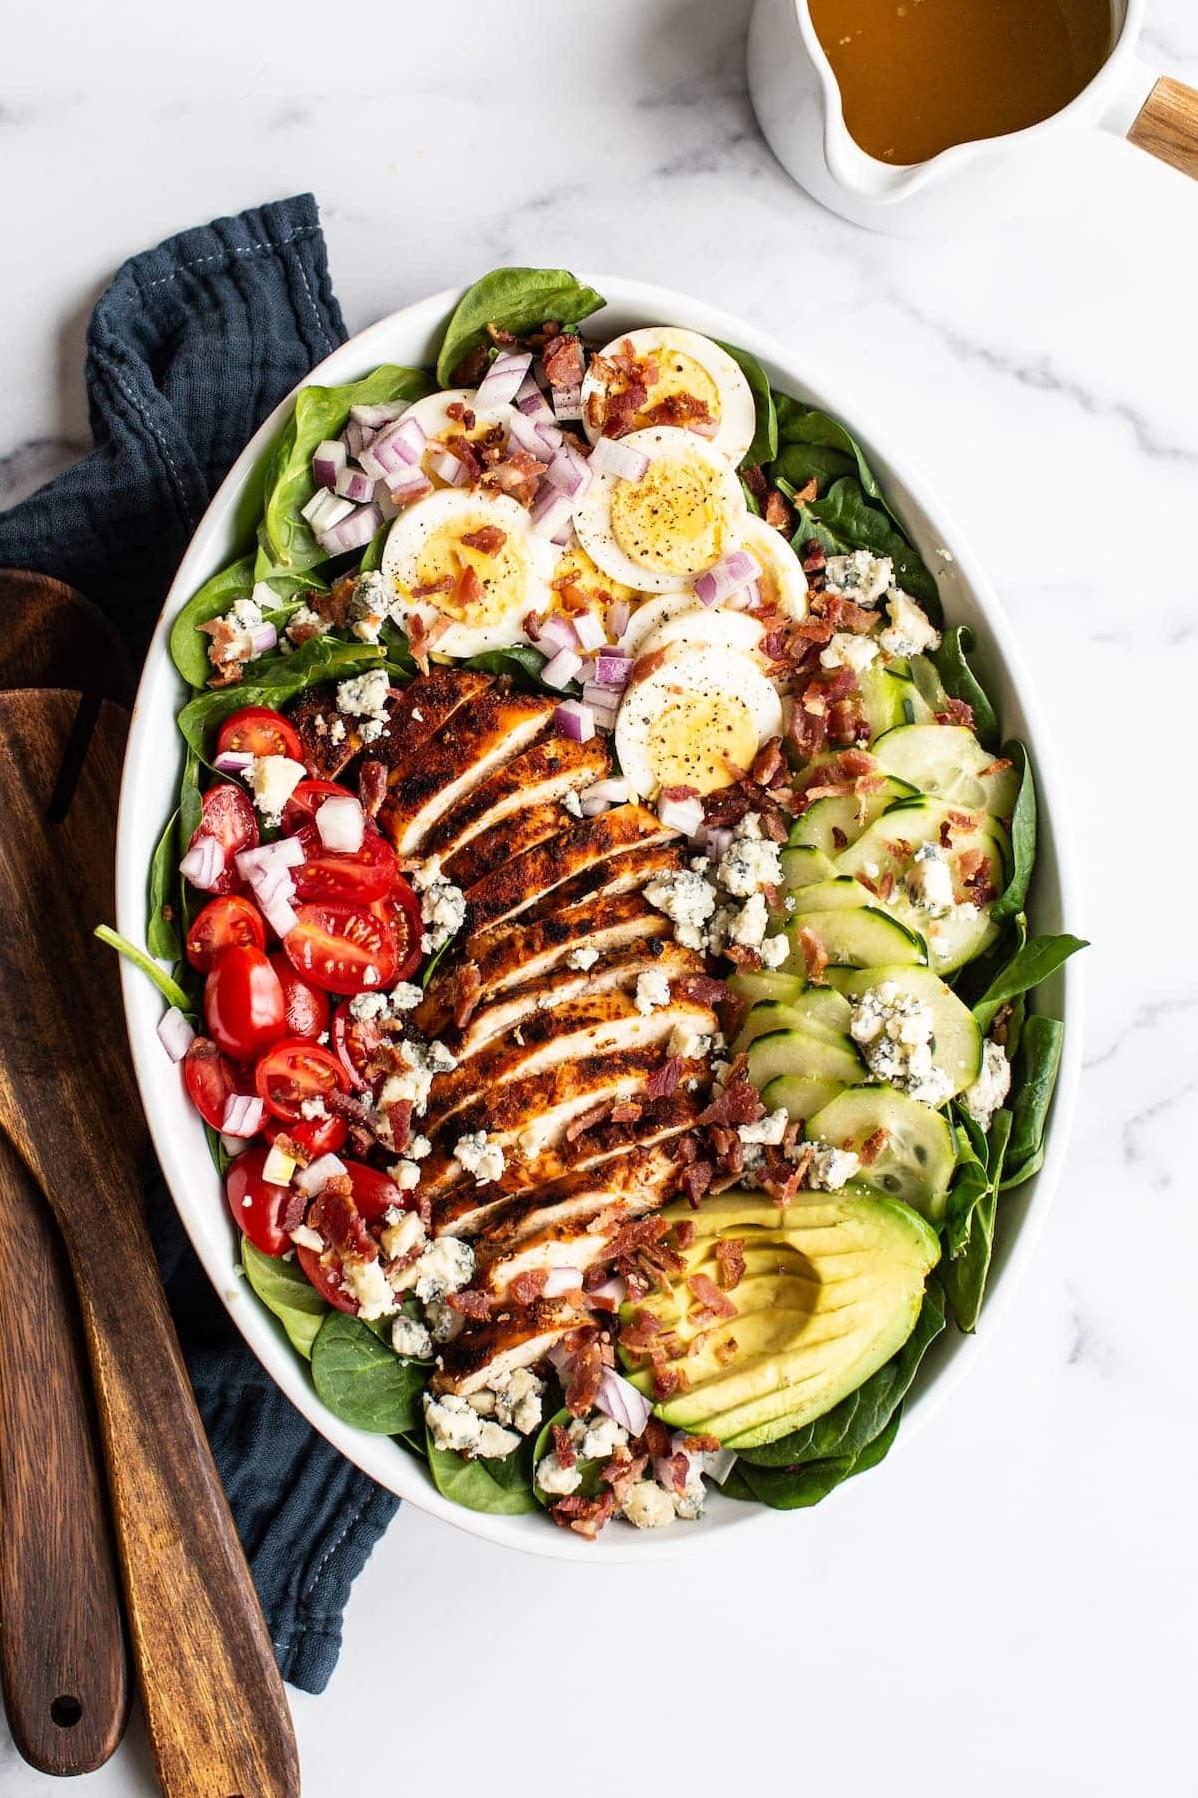 Satisfy Your Cravings with Blackened Chicken Salad Recipe